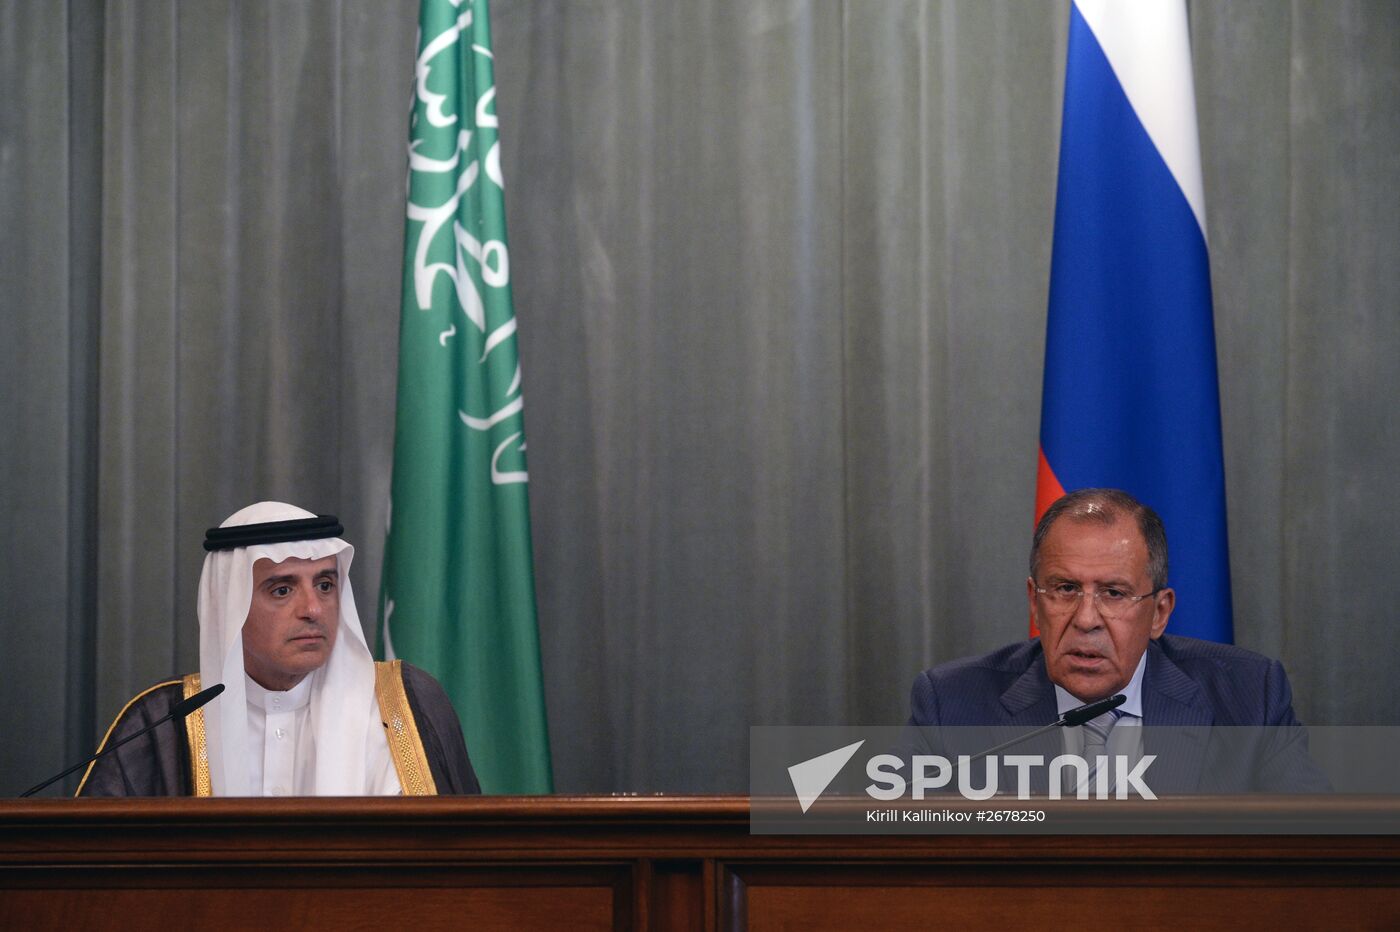 Meeting of Foreign Affairs Ministers of Russia and Saudi Arabia Sergei Lavrov and Adel al-Jubeir